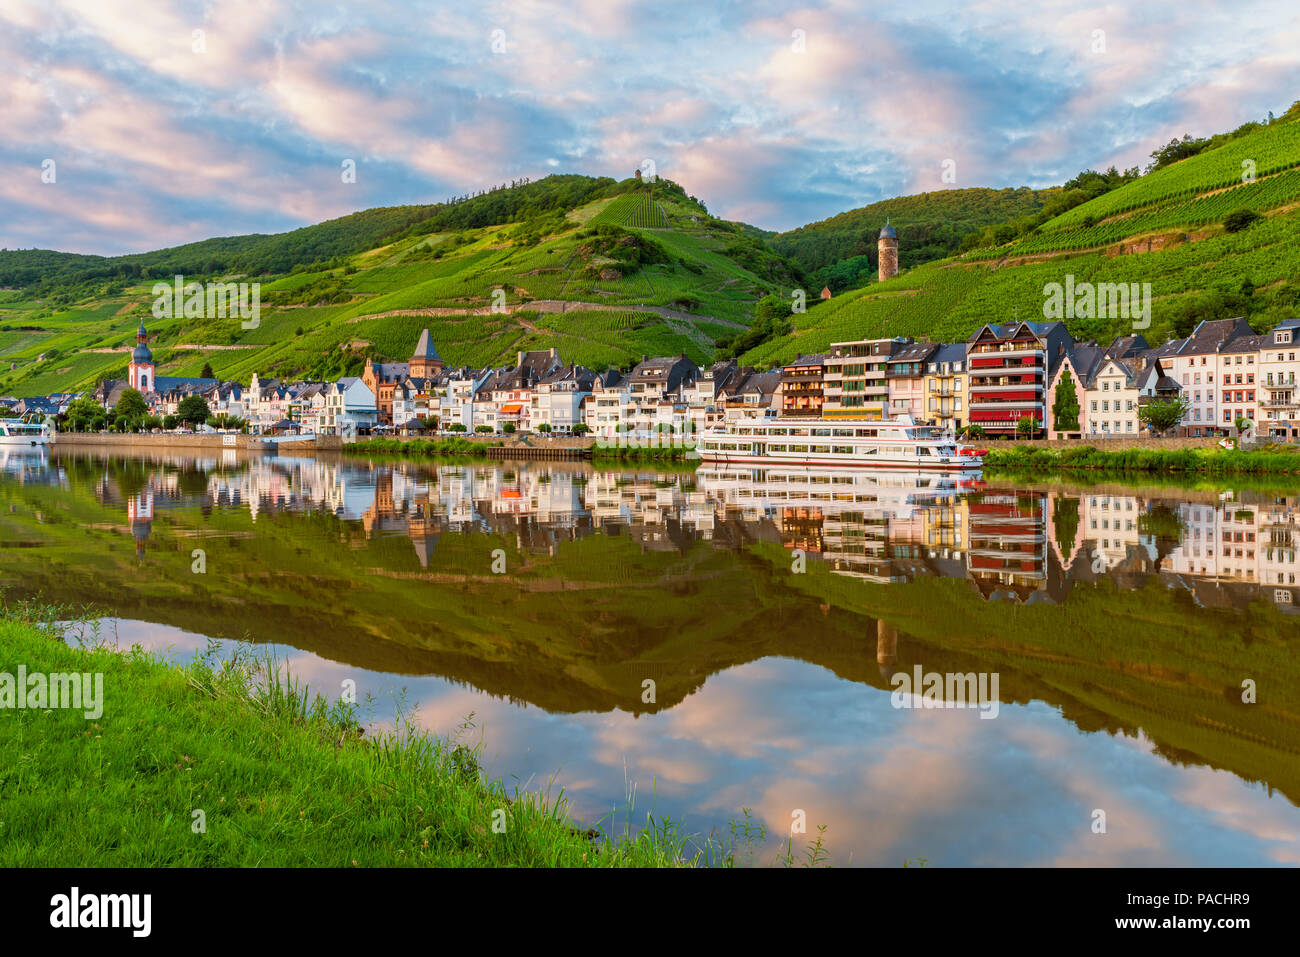 Village of Zell along the Mosel River in Germany at sunset Stock Photo